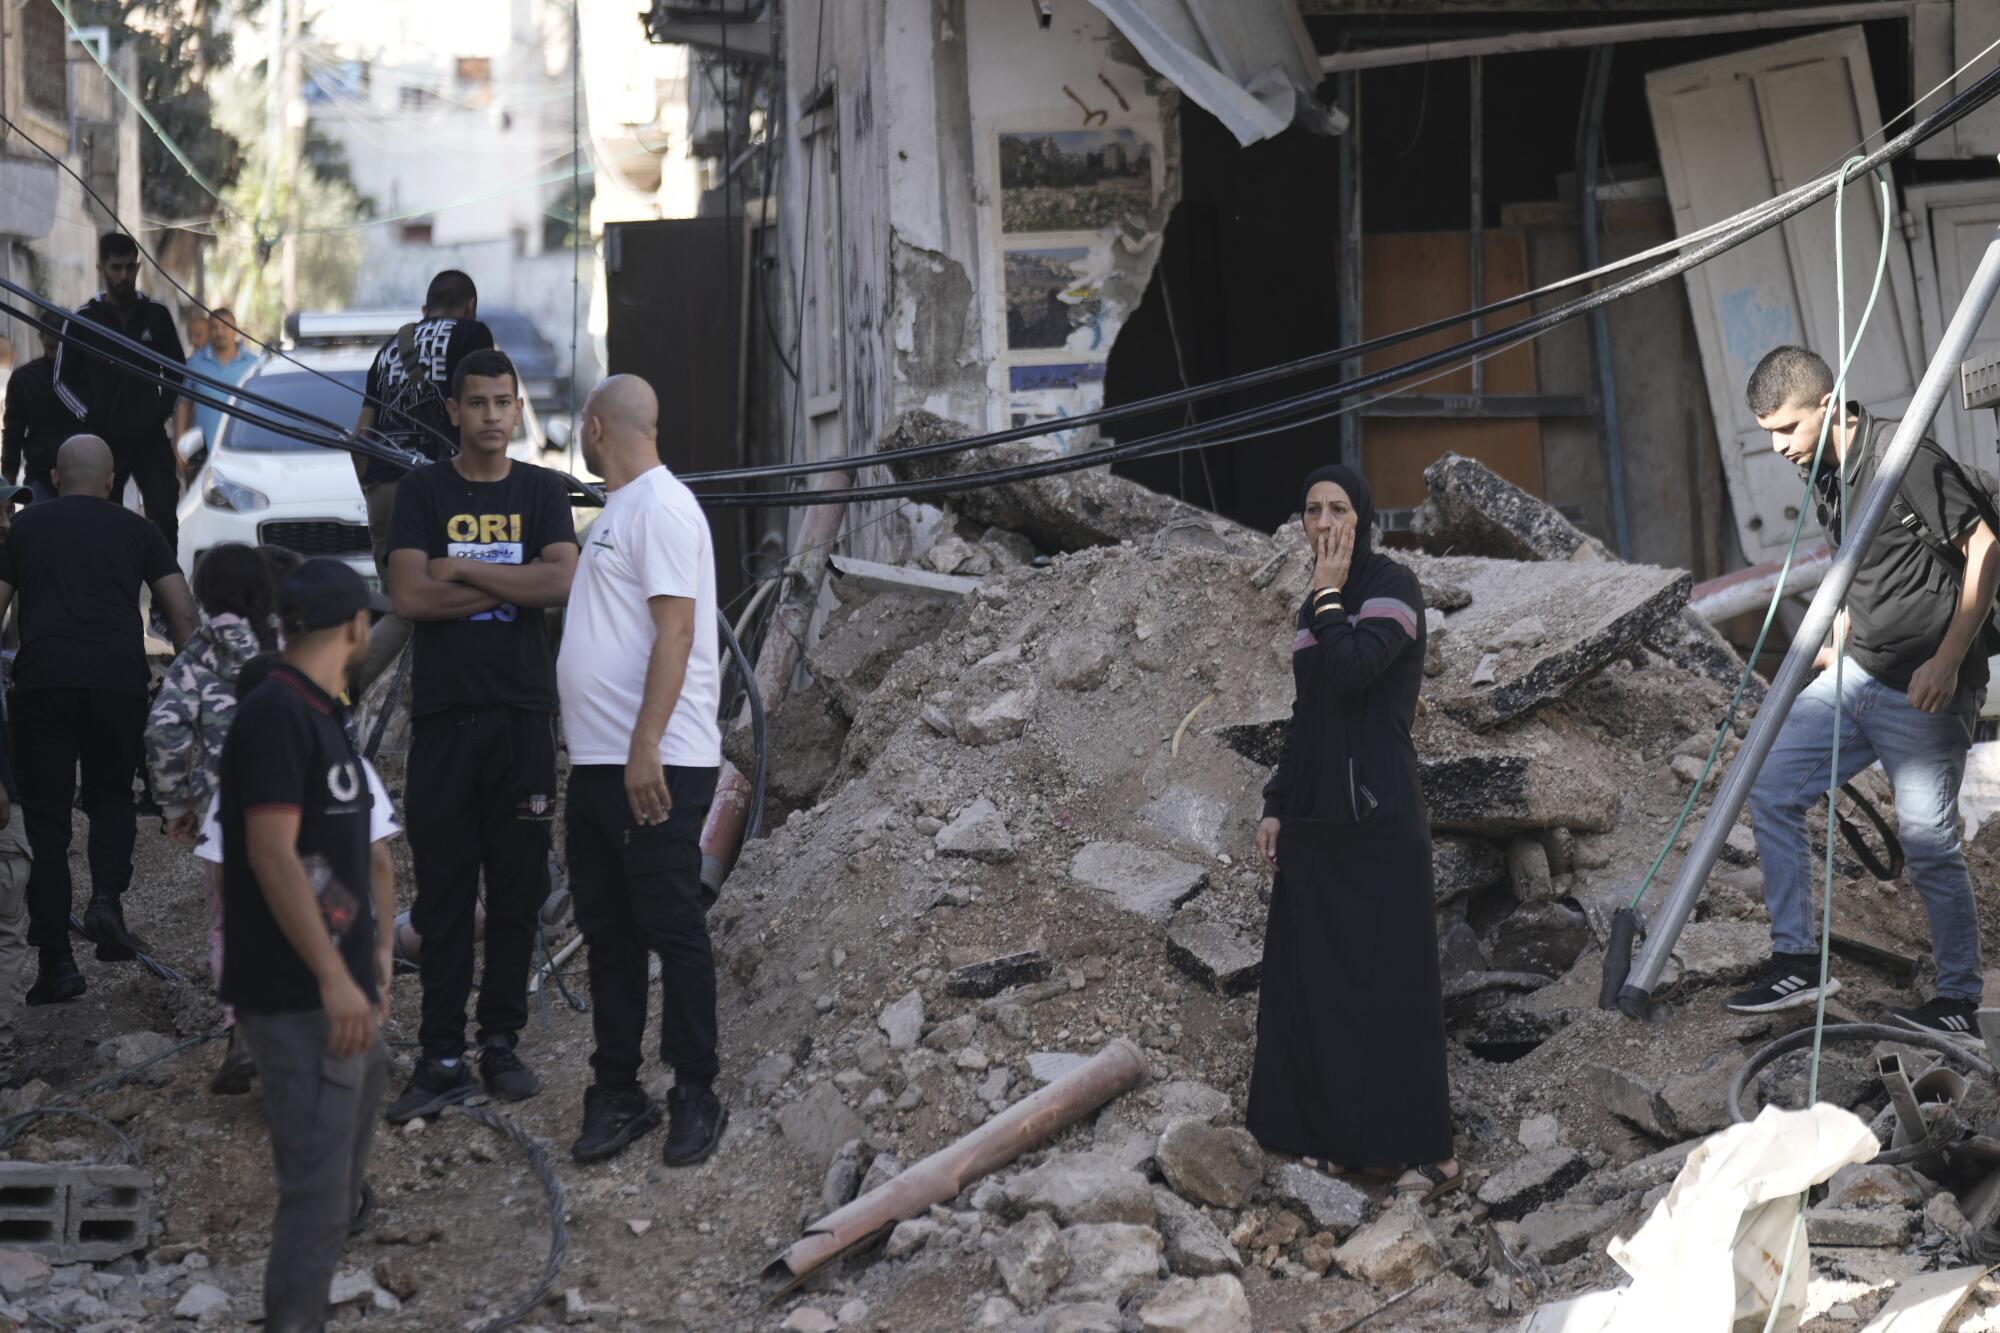 People looking at debris after an Israeli army raid on a Palestinian refugee camp in the West Bank.